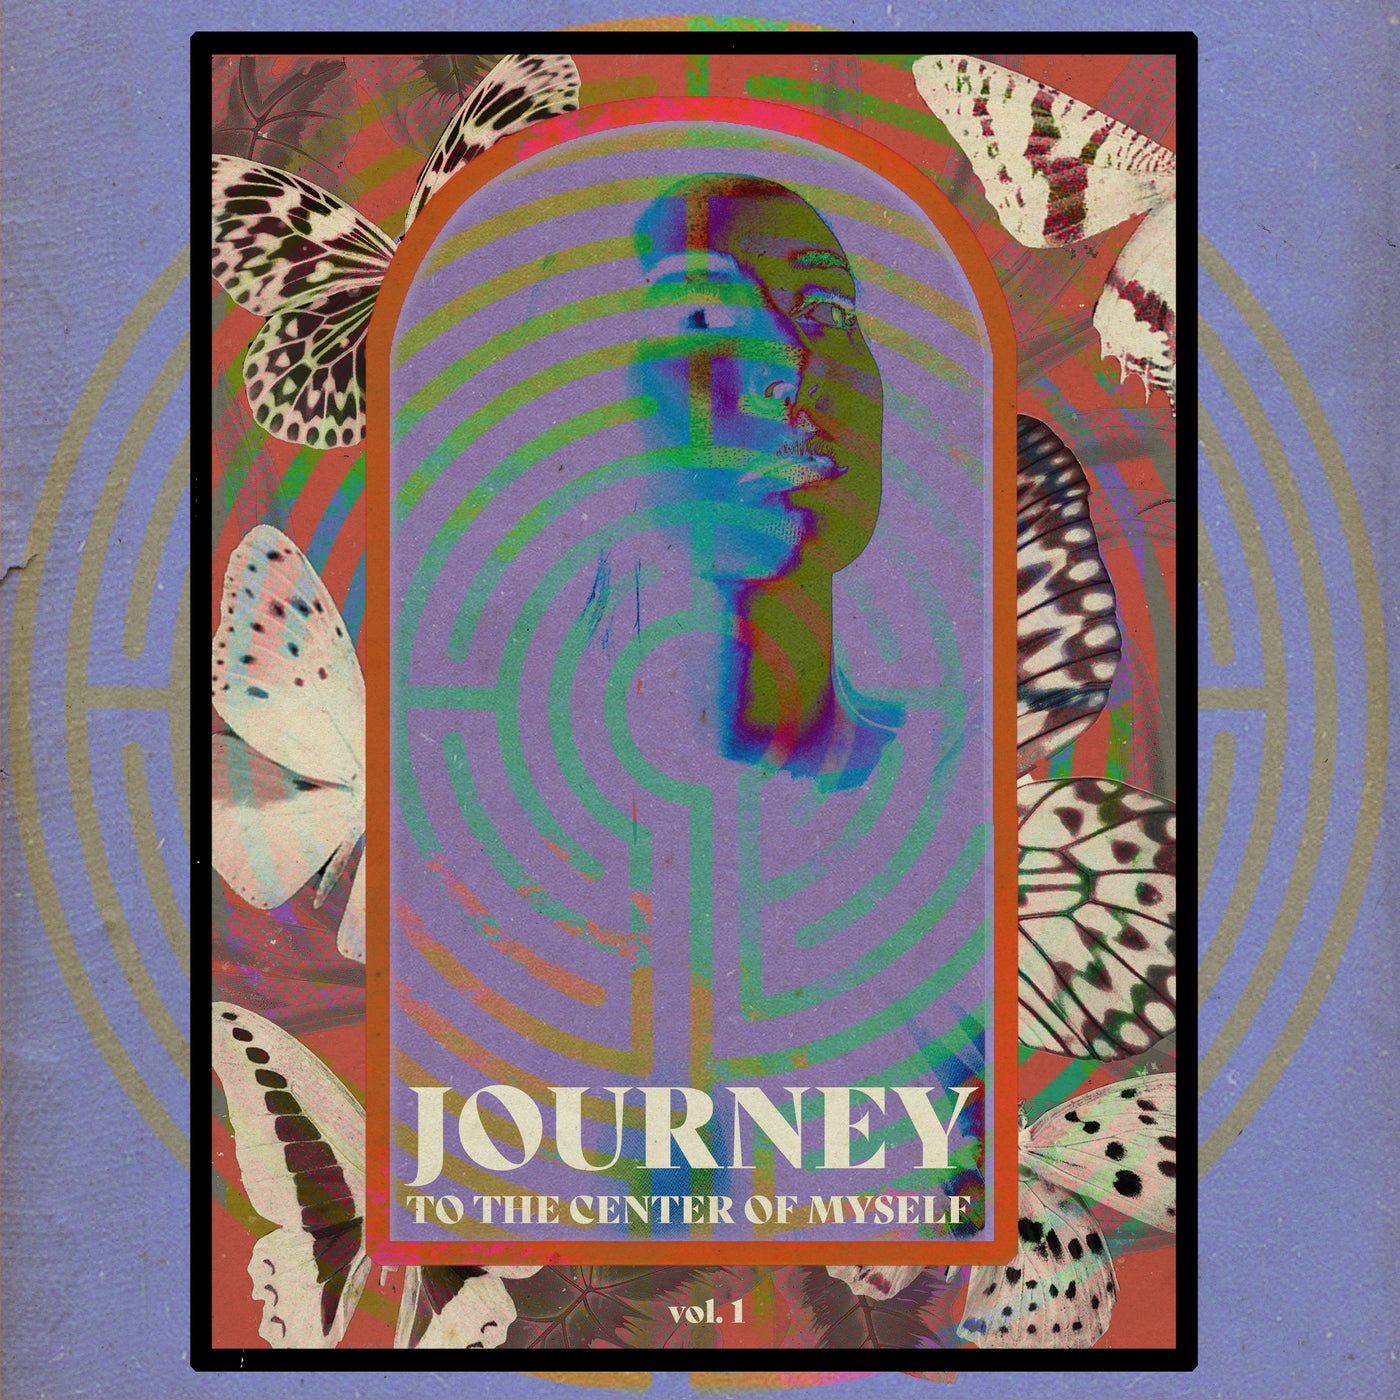 Journey To The Center Of Myself, Vol. 1